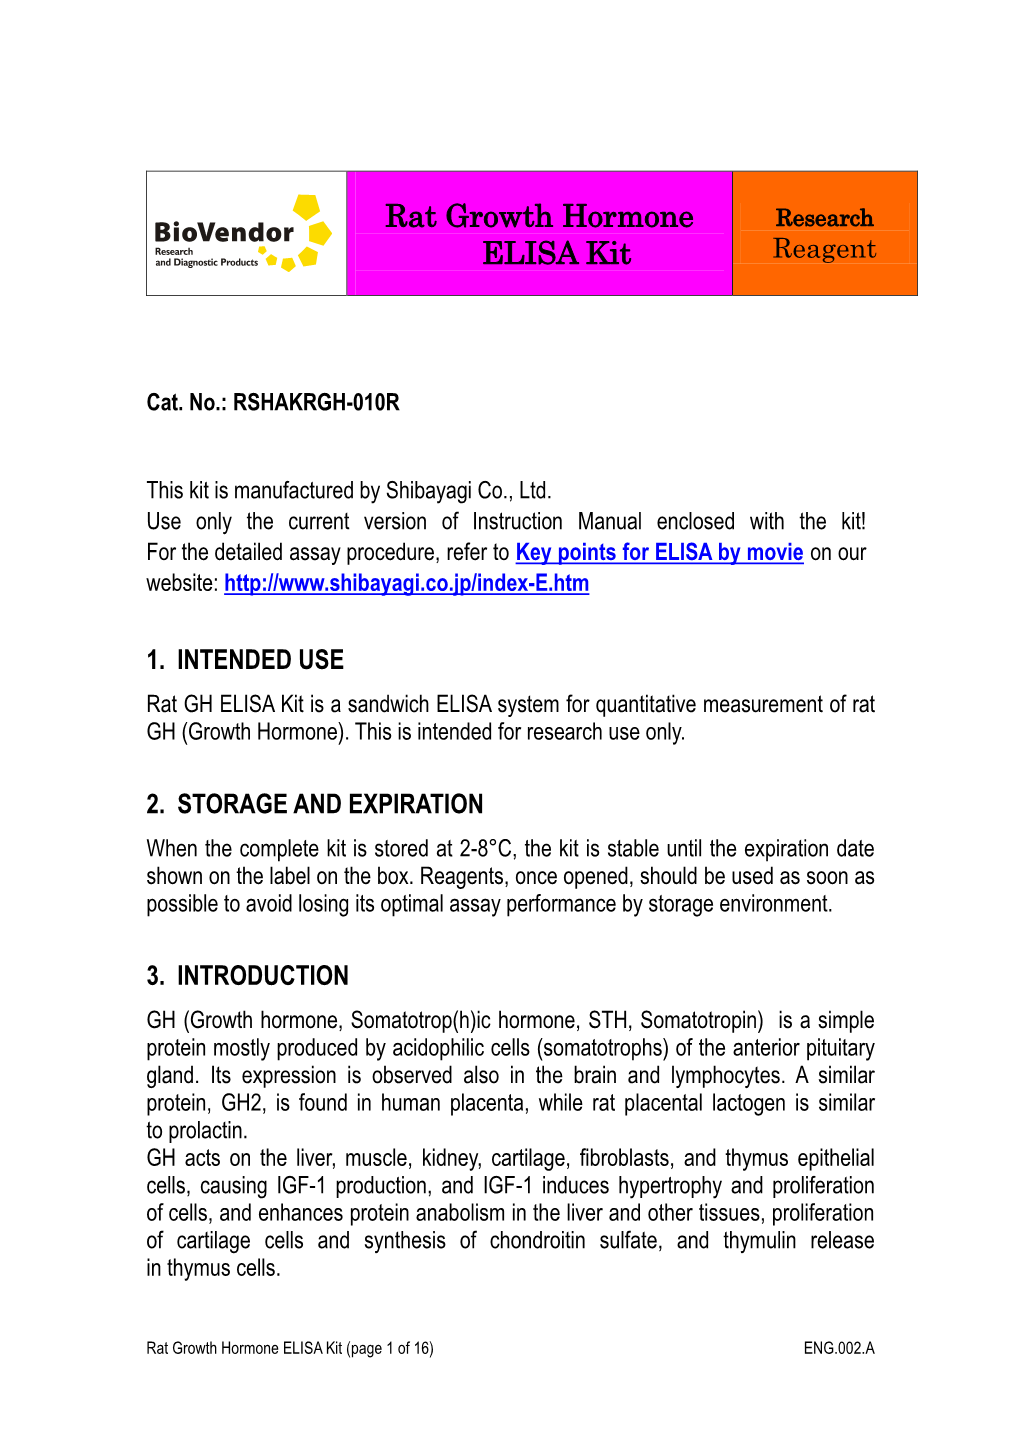 Rat Growth Hormone ELISA Kit (Page 1 of 16) ENG.002.A GH Shows Biphasic Action on Glucose Metabolism